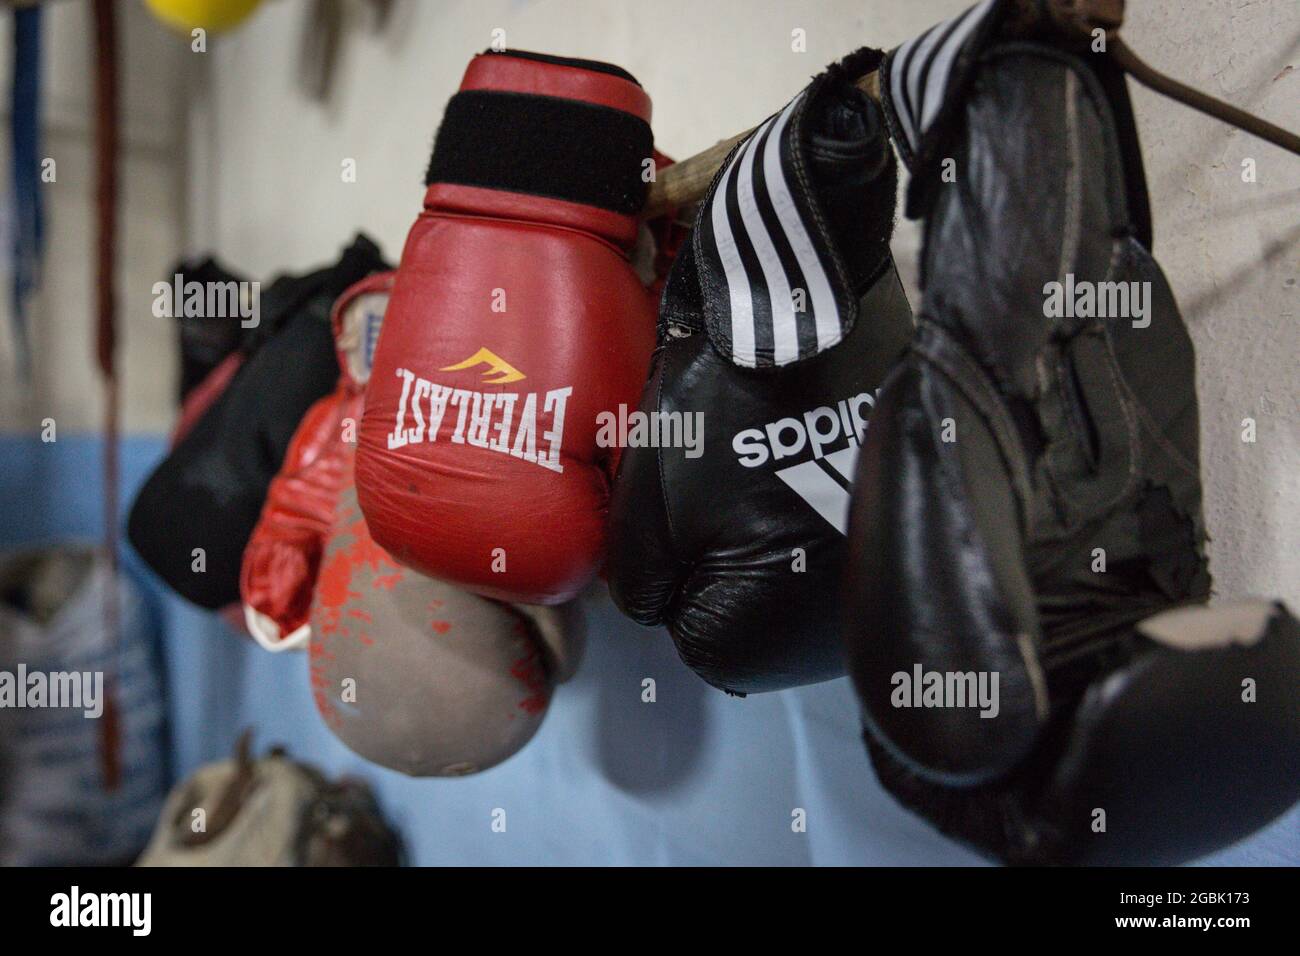 Boxing globes hanging in a gym, Havana, Cuba Stock Photo